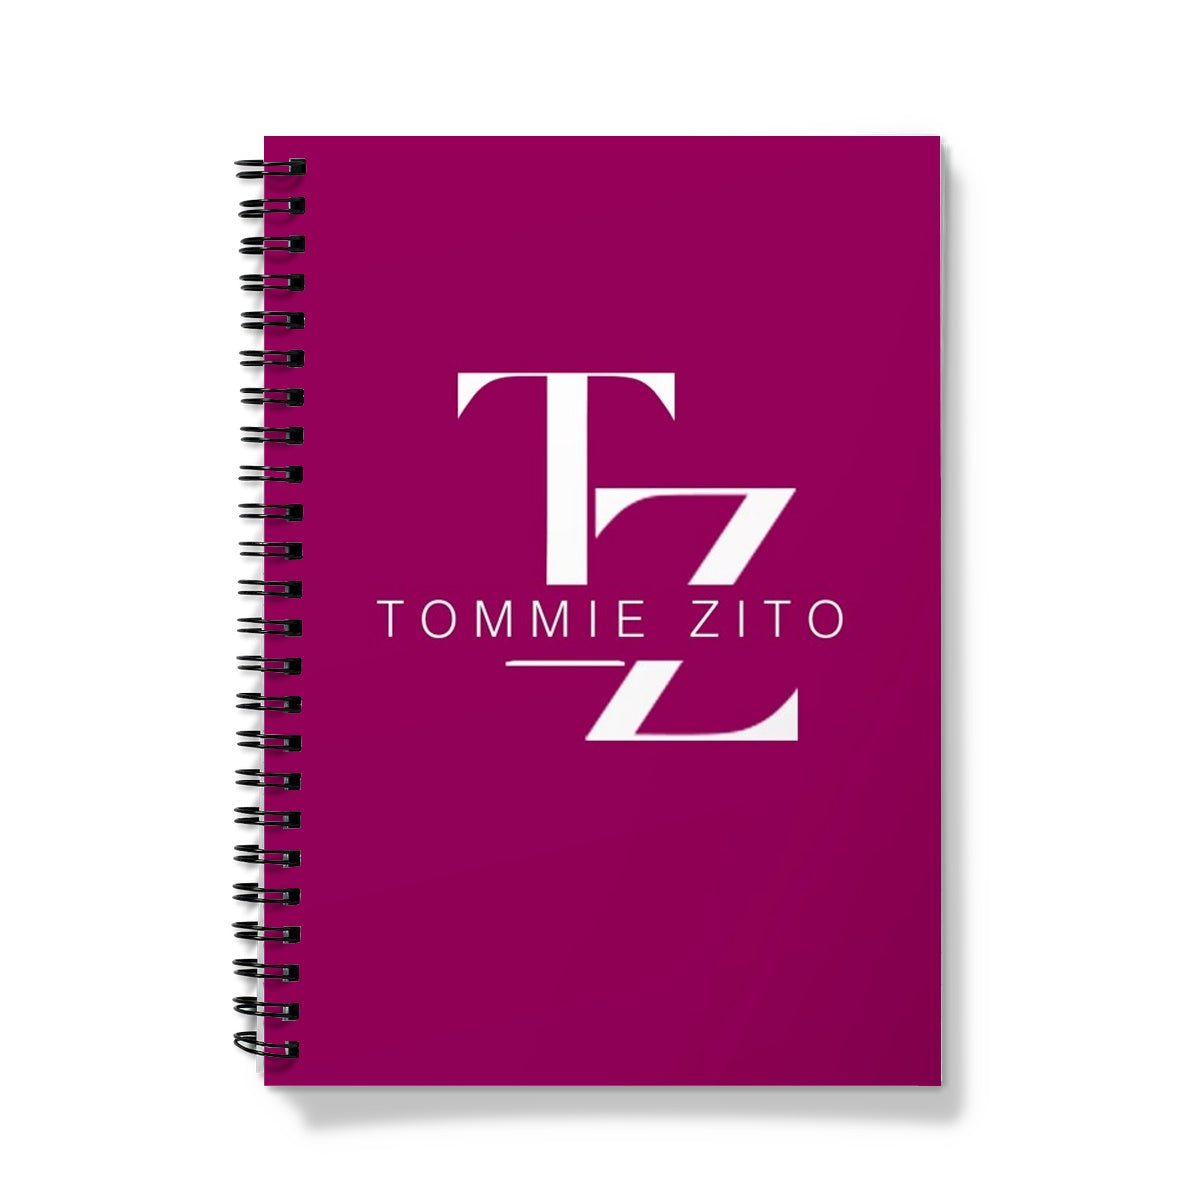 Tommie Zito  Notebook